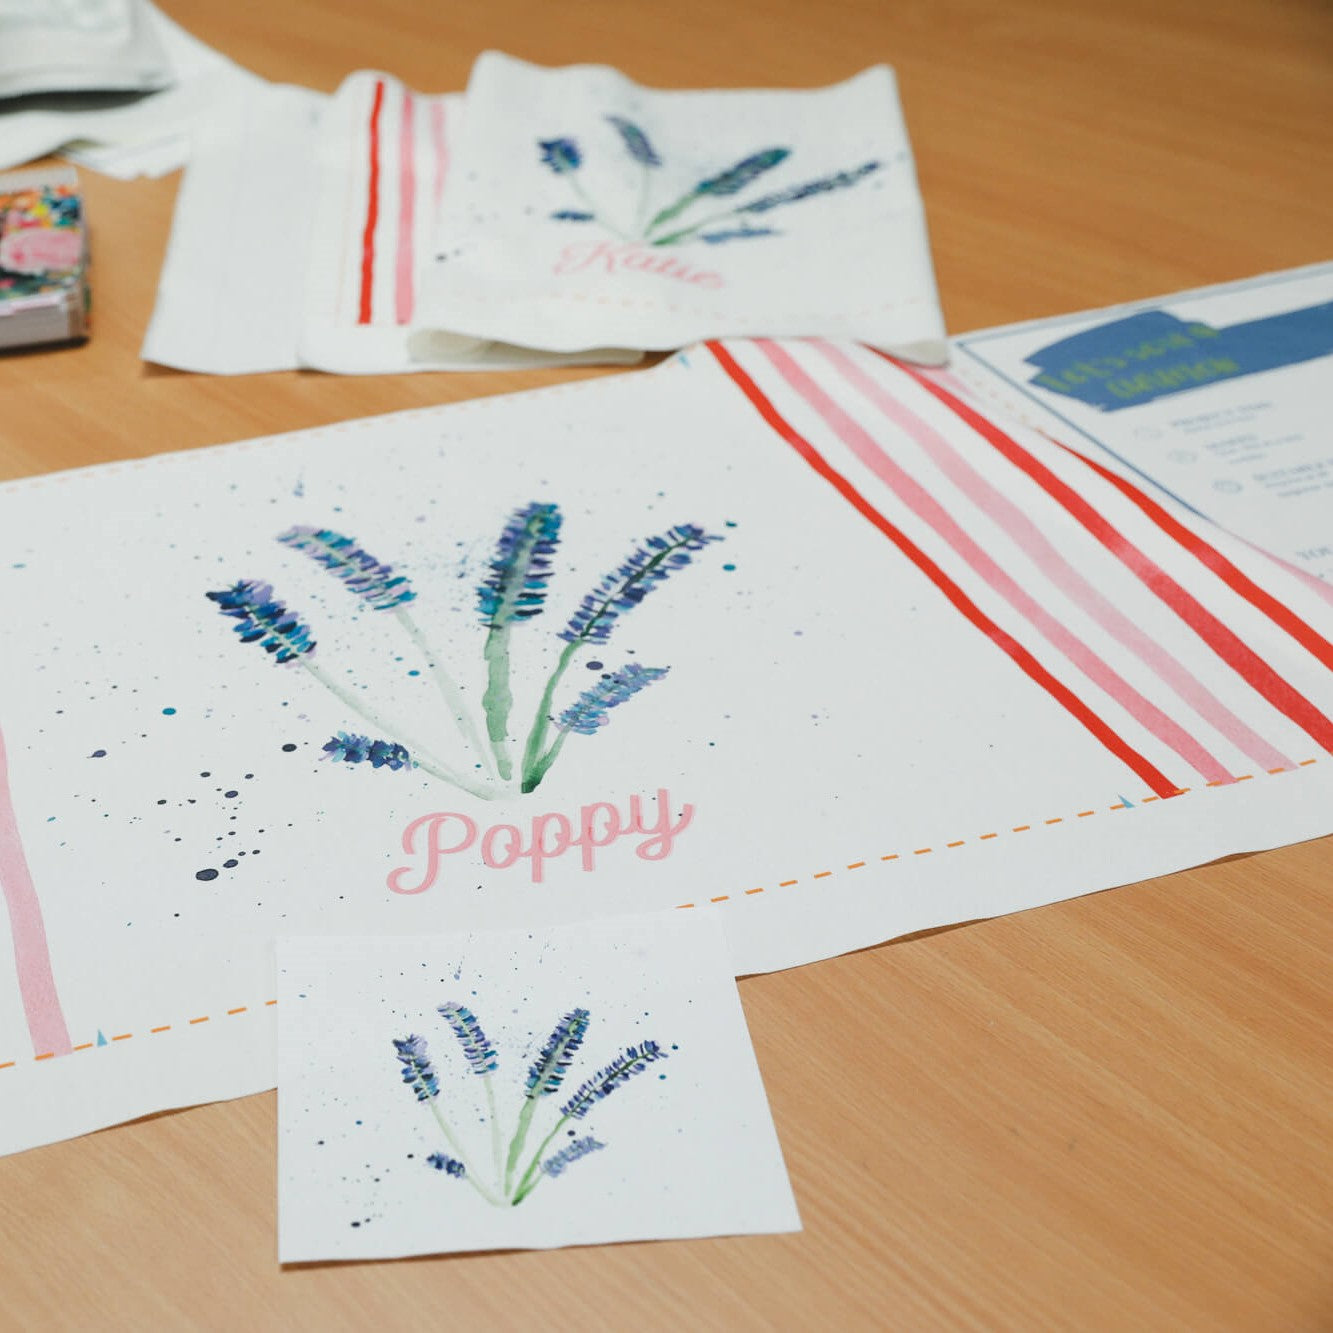 Sample artwork for DIY cushion kit. Lavendar flowers iwth the word "poppy" are printed on the front.